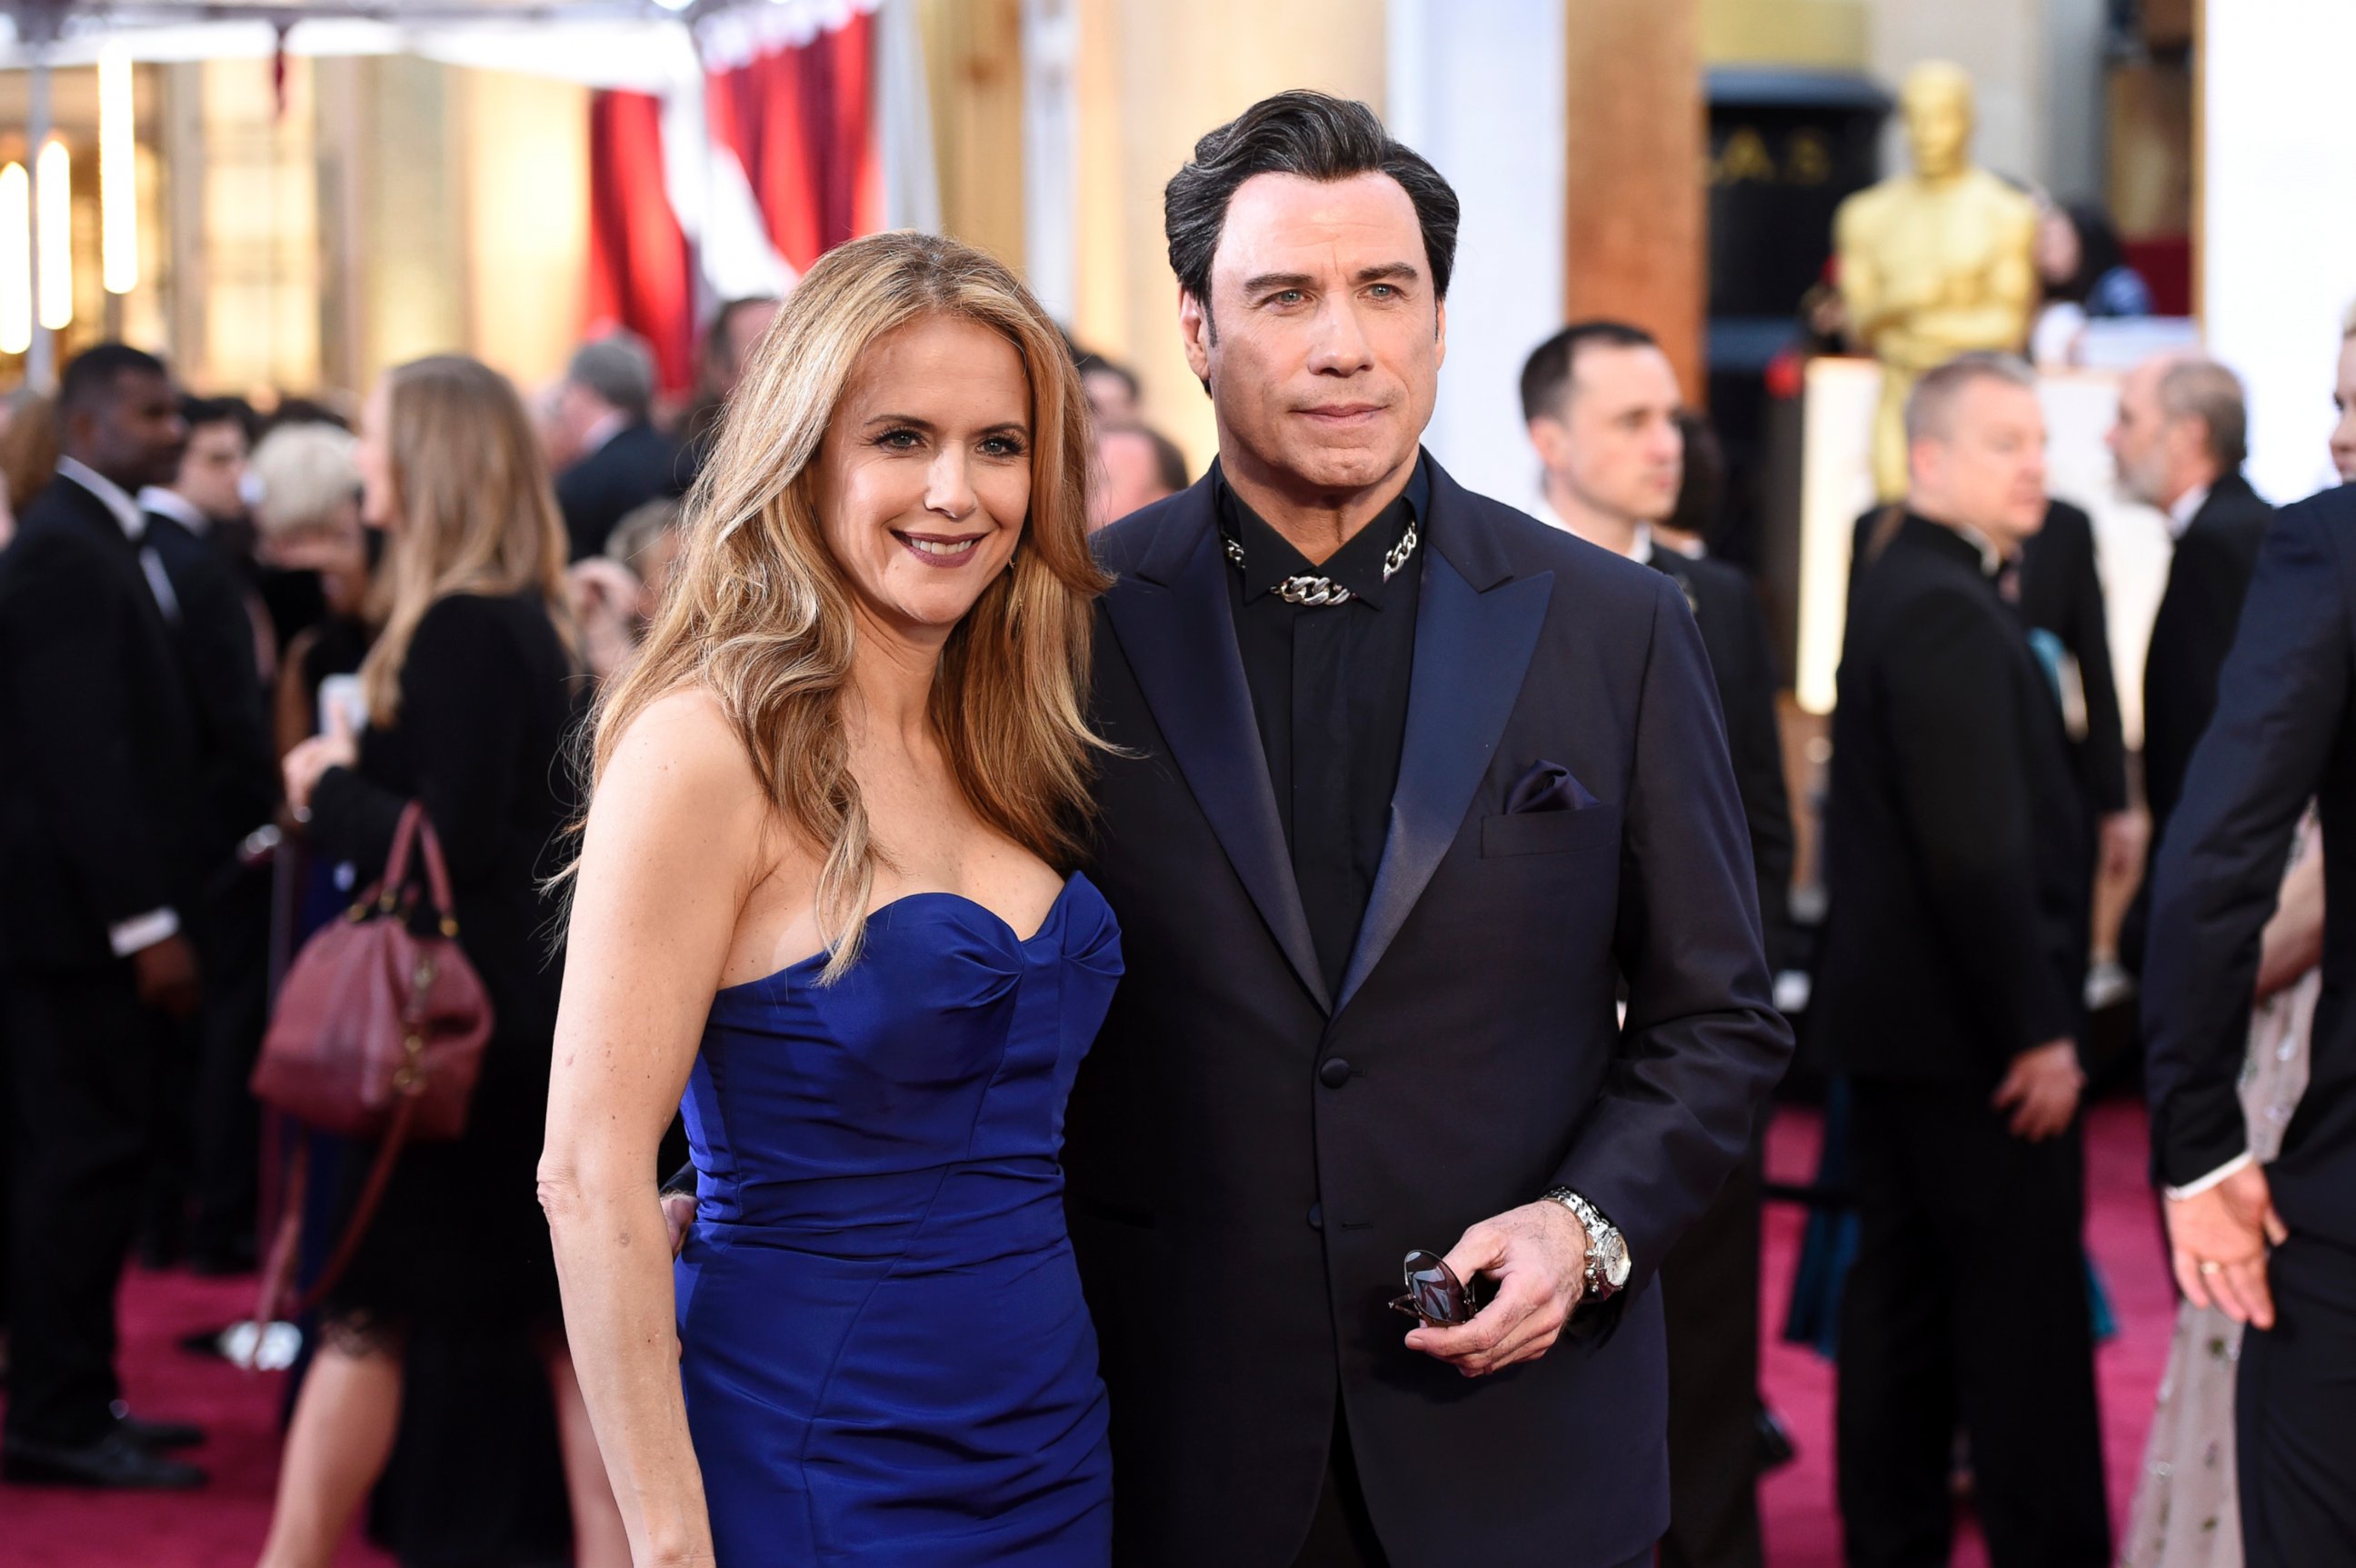 PHOTO: More male celebrities, including John Travolta, are following the "manscara" trend.